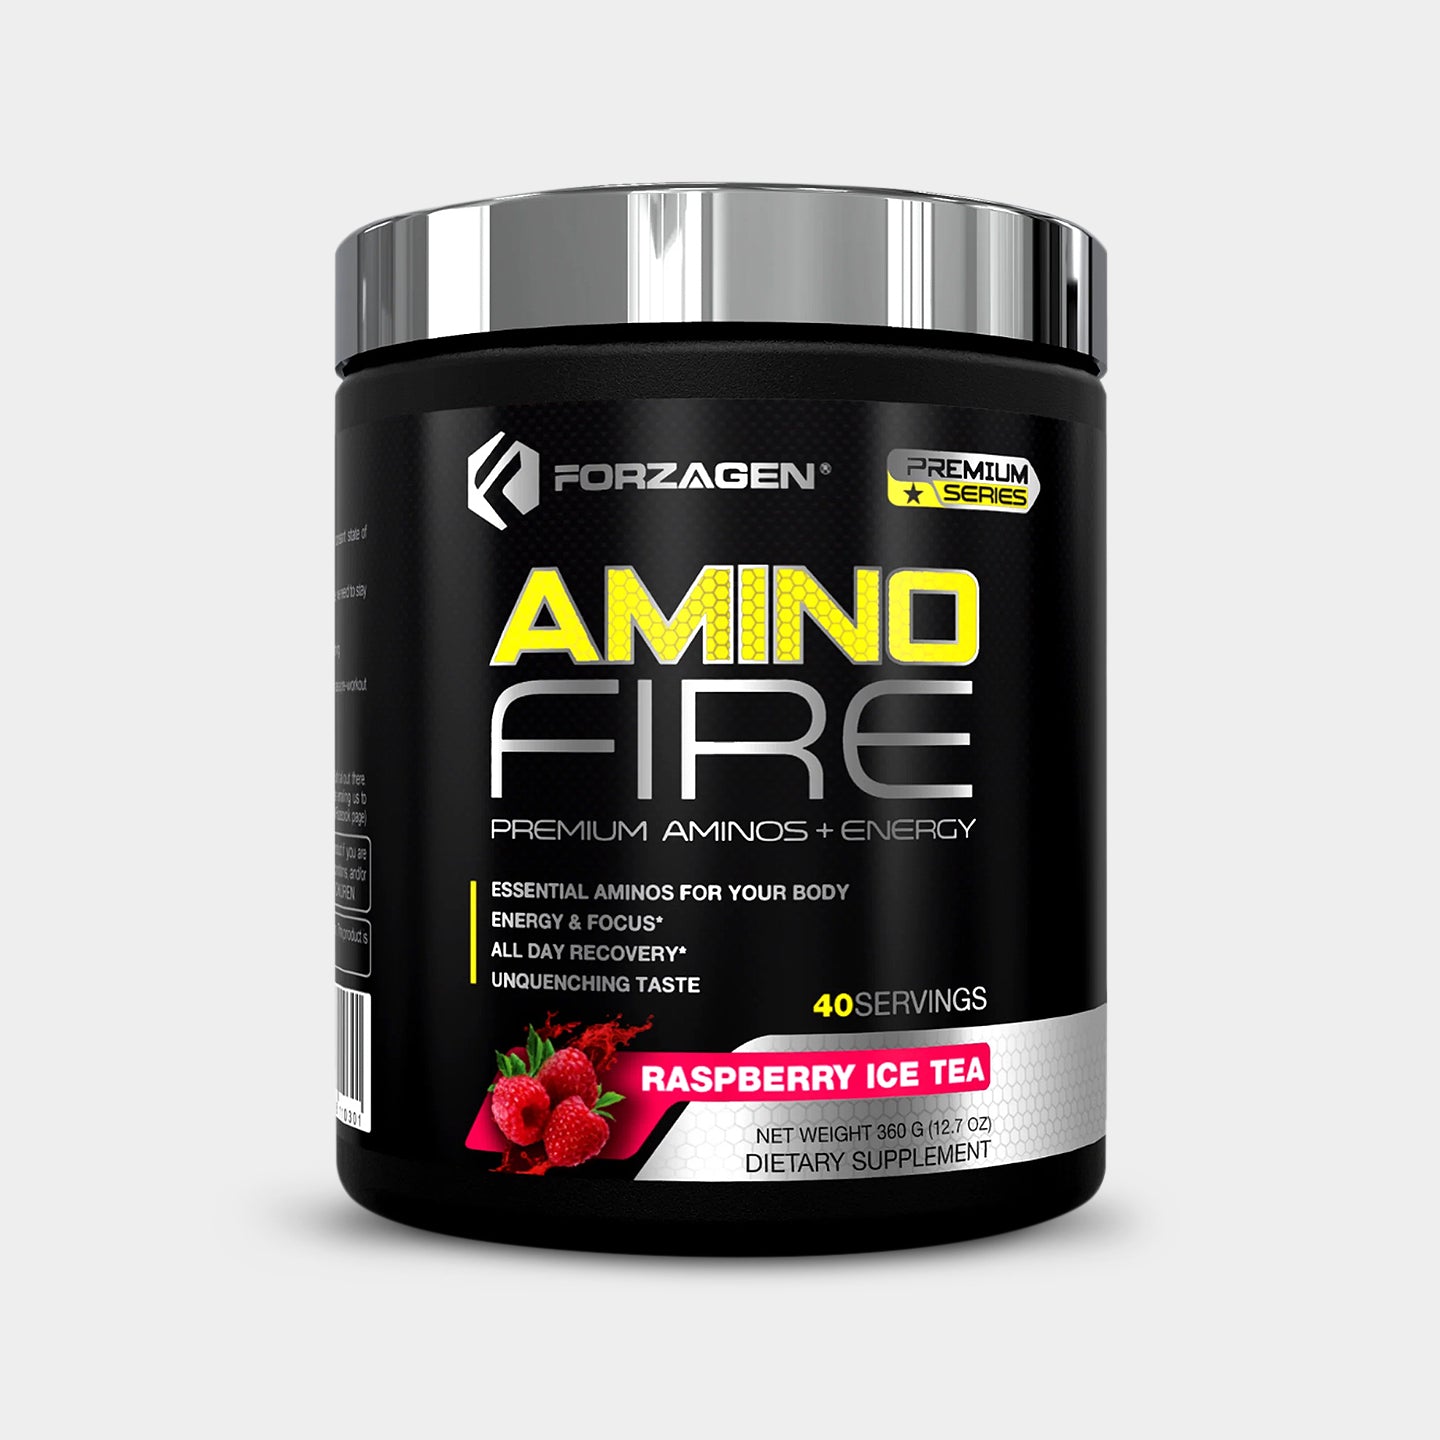 Forzagen Amino Fire Essential BCAAs + Pre Workout Energy, Raspberry Ice tea, 40 Servings A1